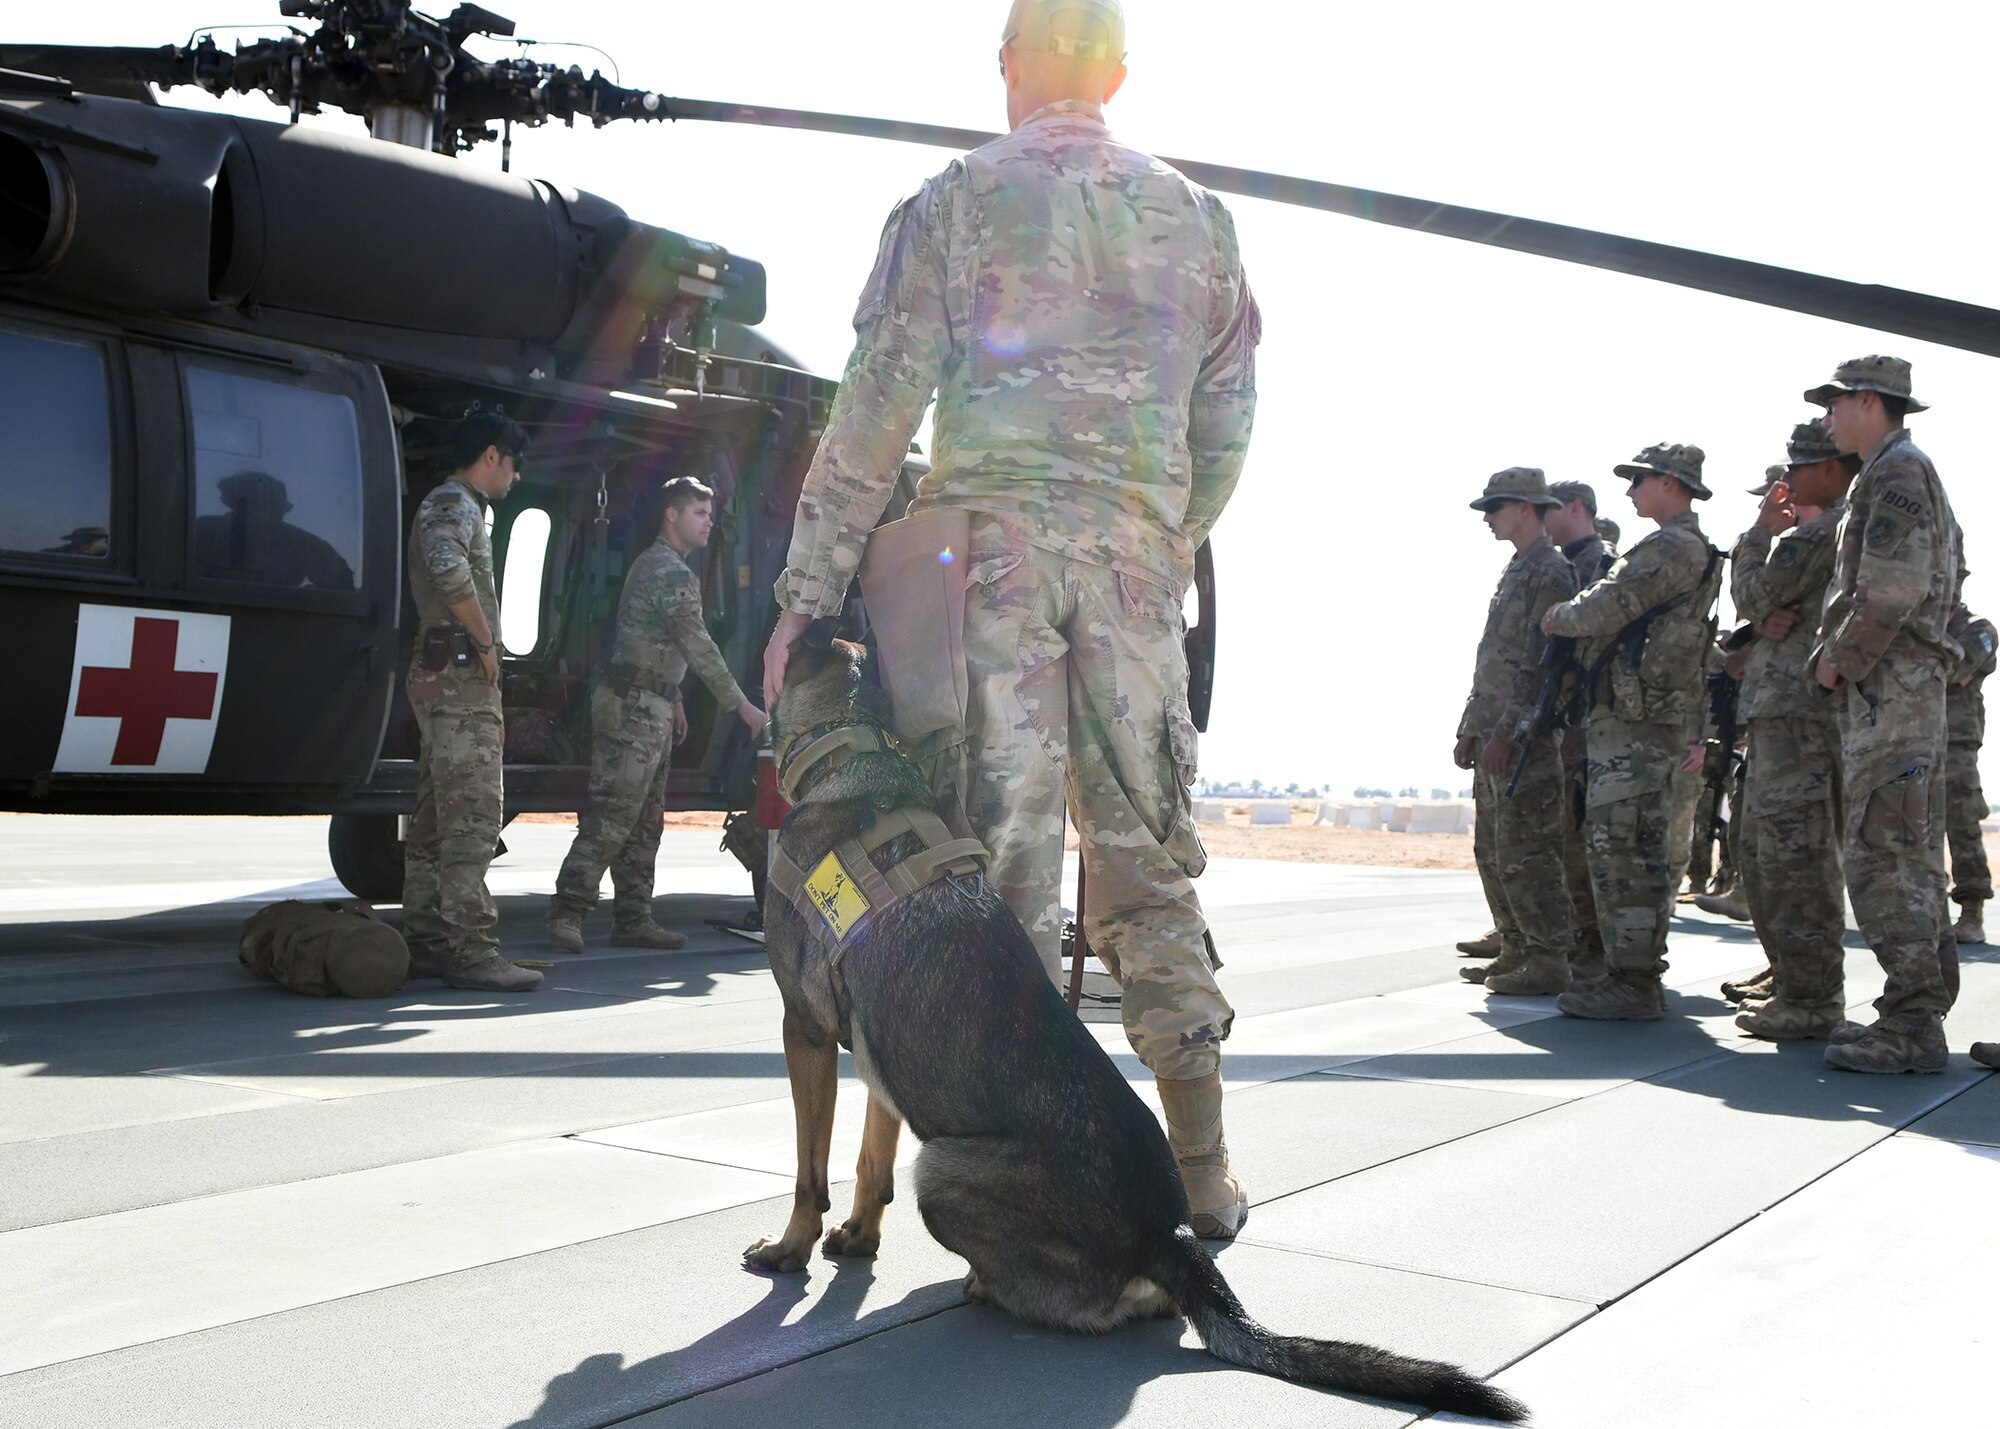 U.S. Air Force Staff Sgt. Daniel Duarte, 378th Expeditionary Security Forces Squadron K-9 handler, and his military working dog, Tuko, watch as U.S. Army personnel brief the 378th ESFS on medical evacuation techniques Nov. 27, 2019, at Prince Sultan Air Base, Saudi Arabia.